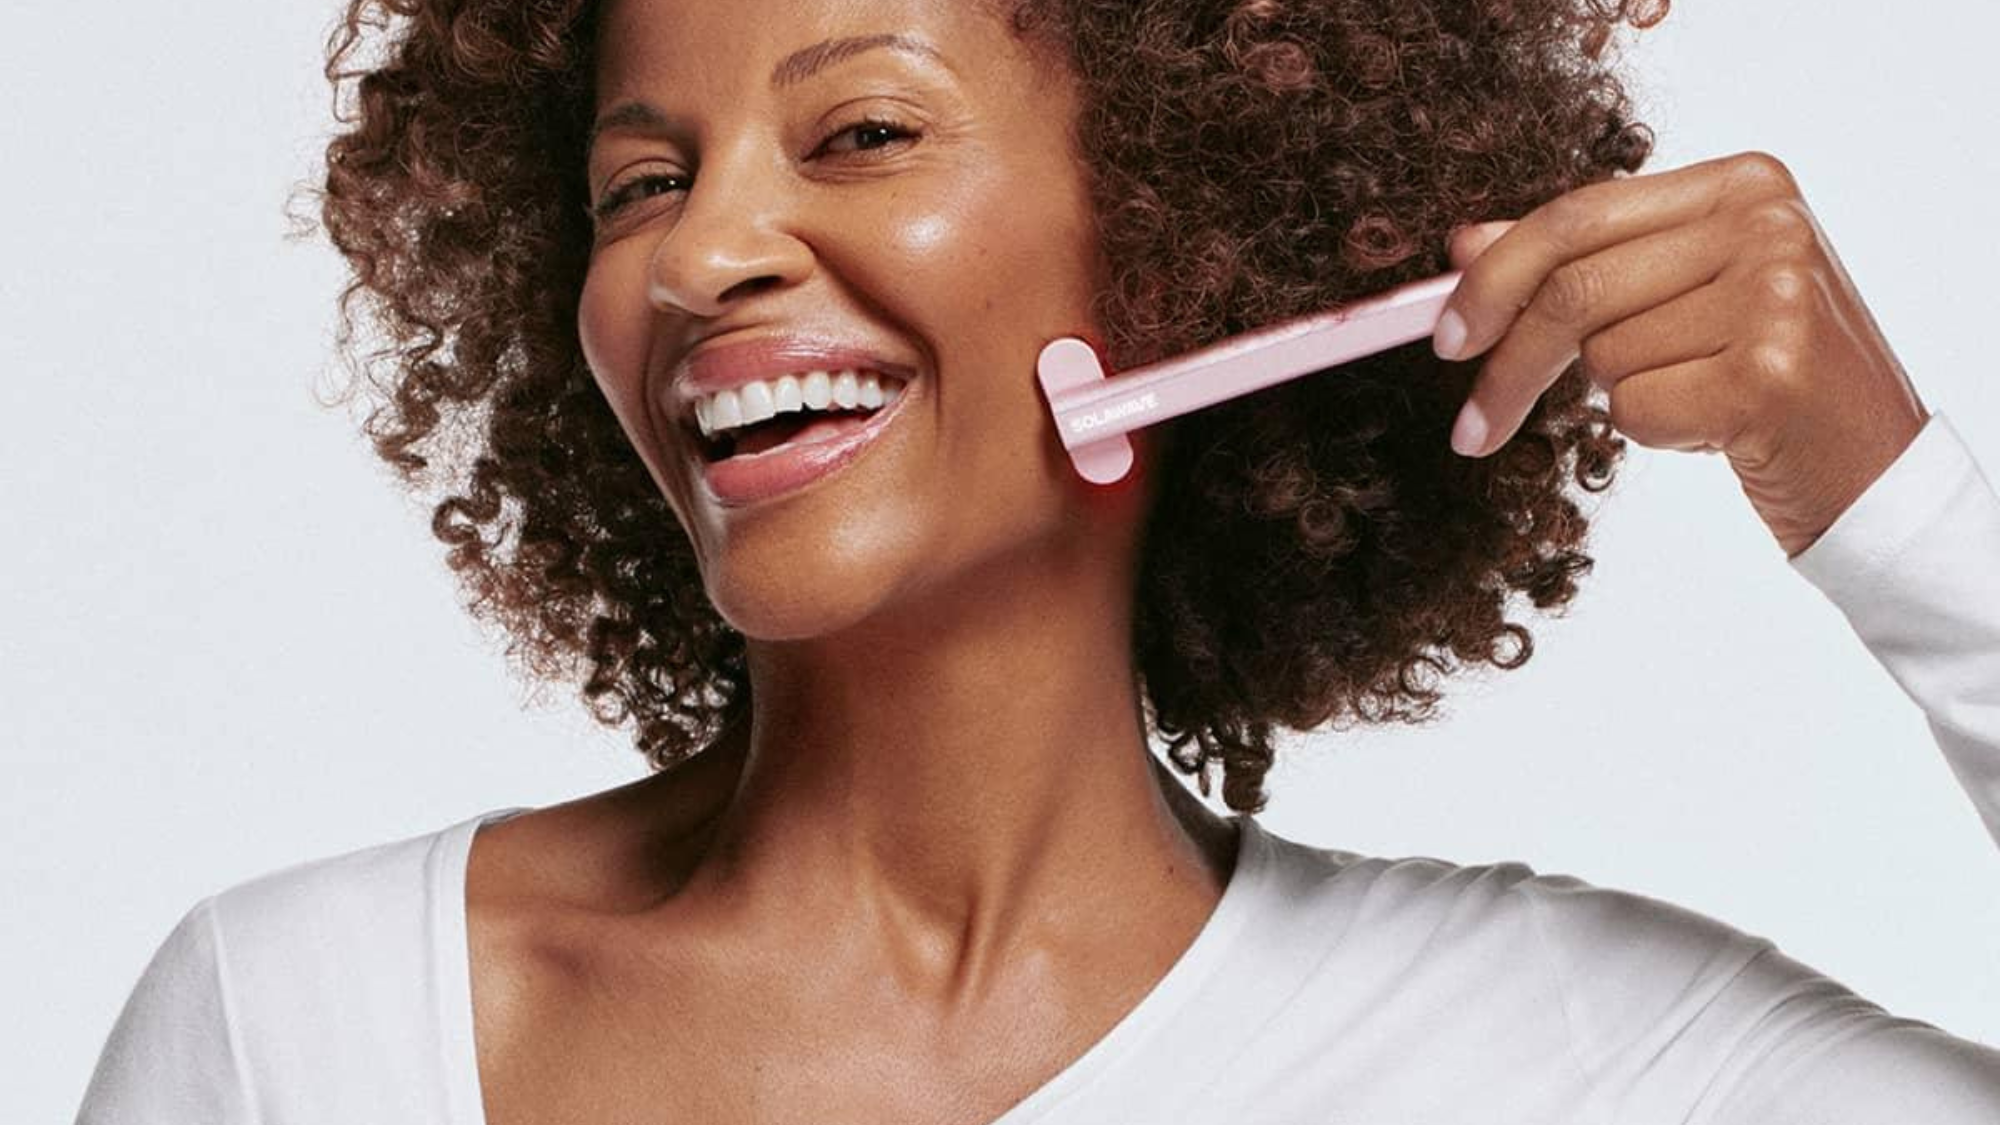 woman smiling and using a solawave skin wand 